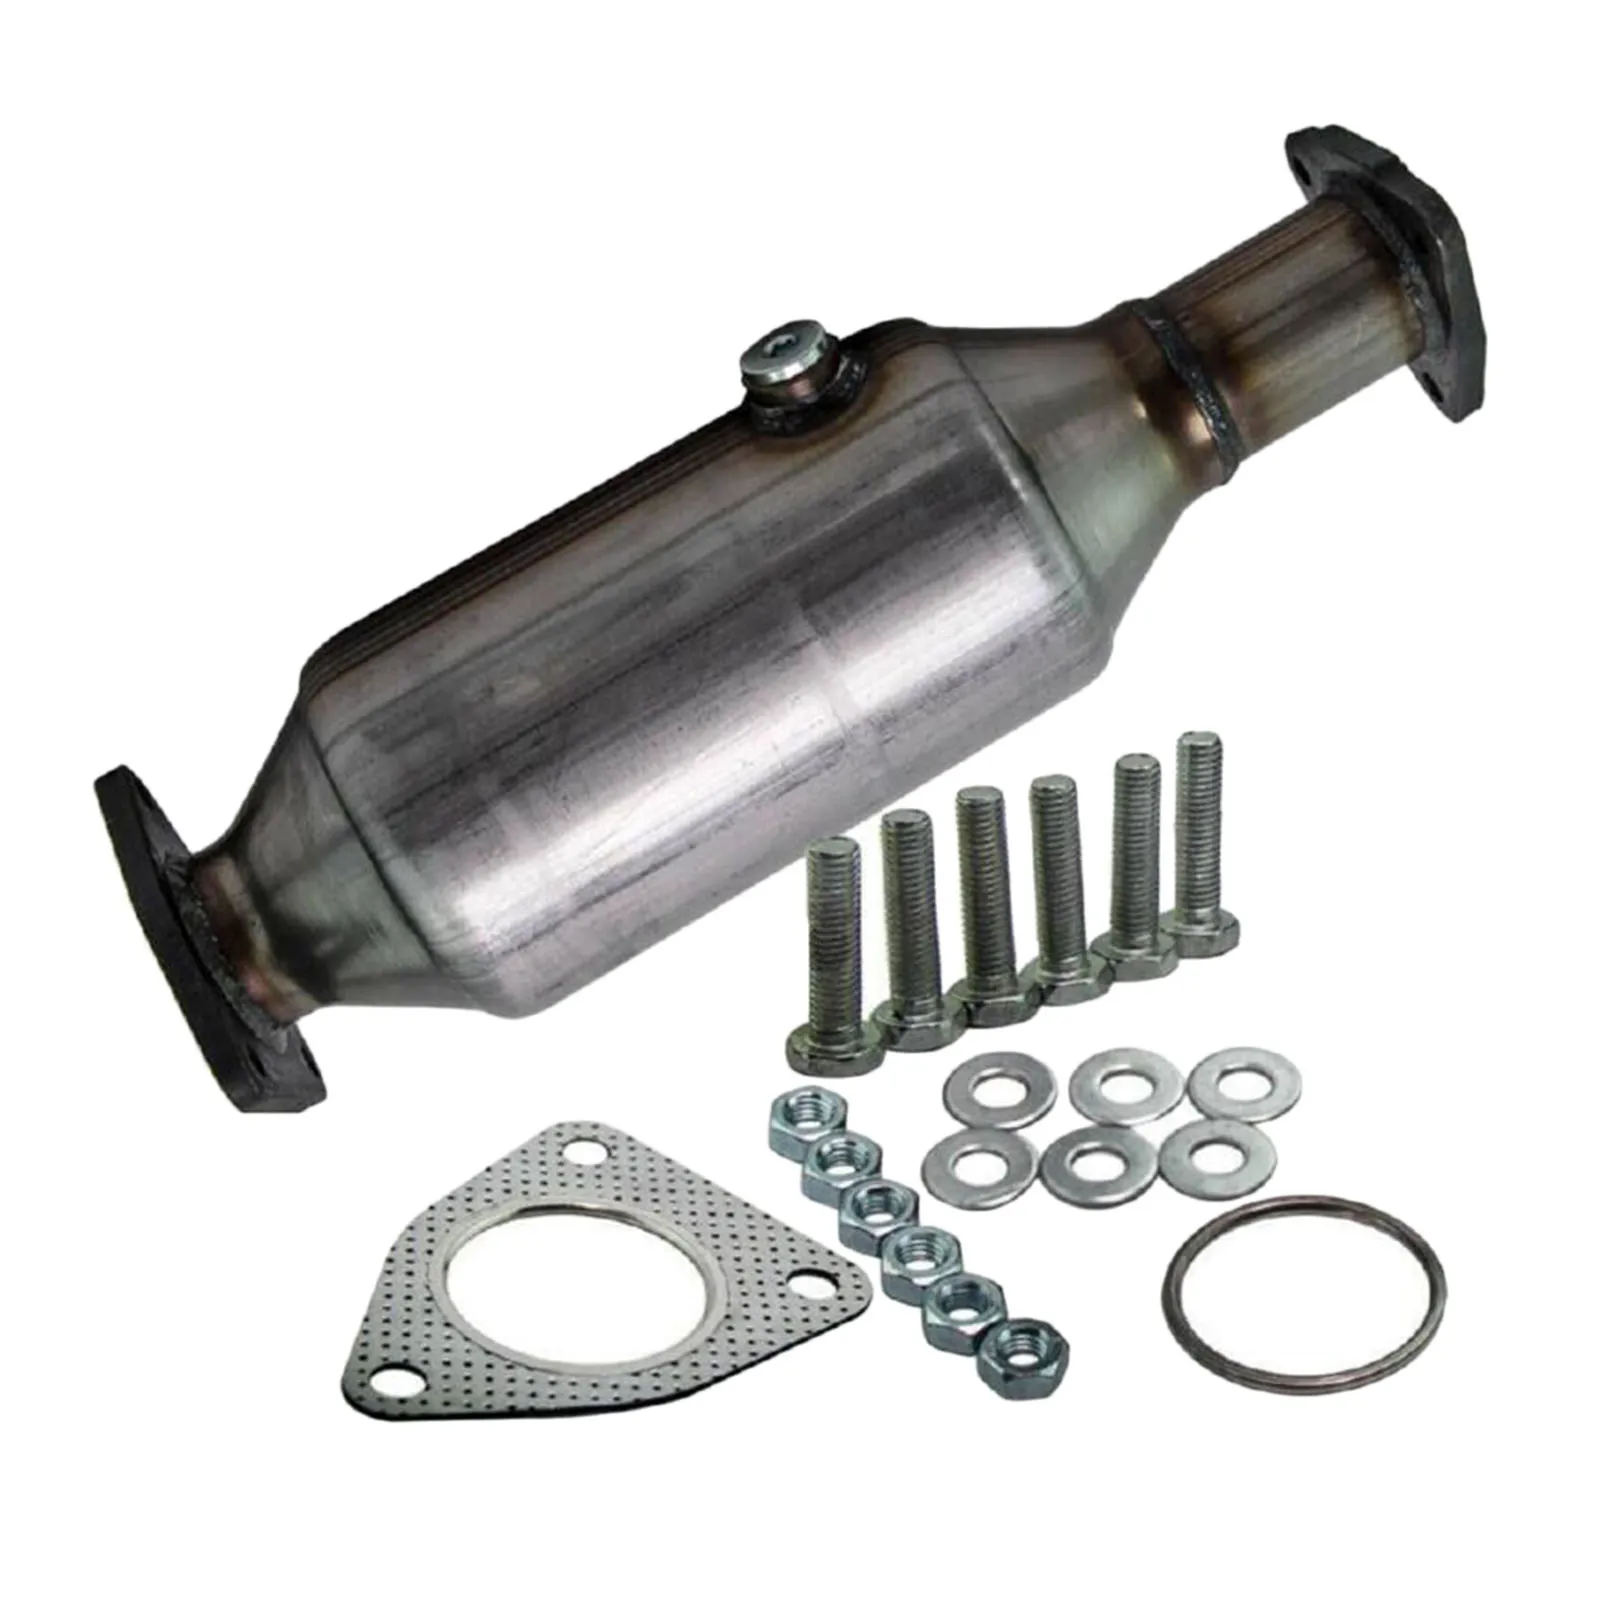 Catalytic Converter Fits for 1998-2002 Honda Accord 2.3L Includes Bolts and